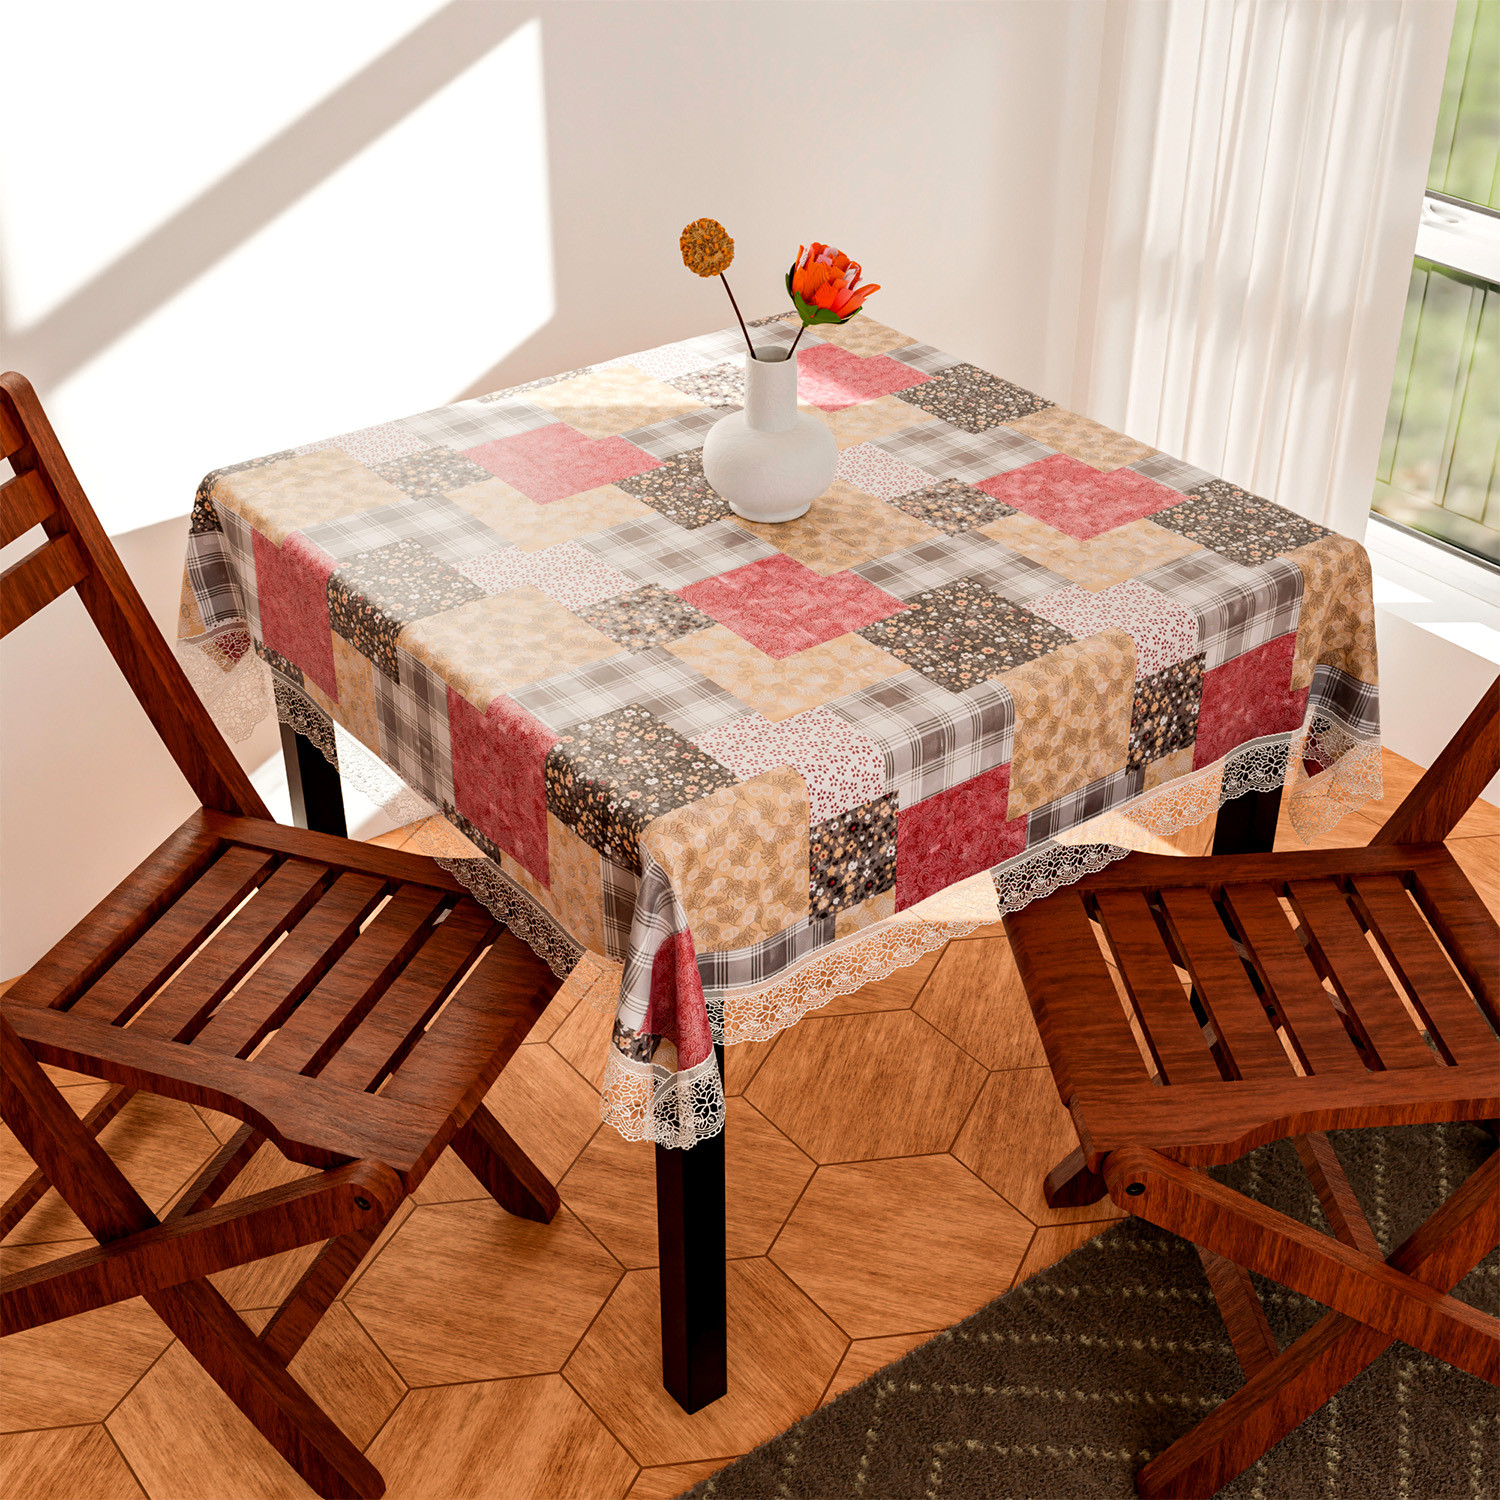 Kuber Industries Square Table Cover for 4 Seater|PVC Waterproof Square Pattern Tablecloth Indoor & Outdoor|48x48 Inch (Multicolor)